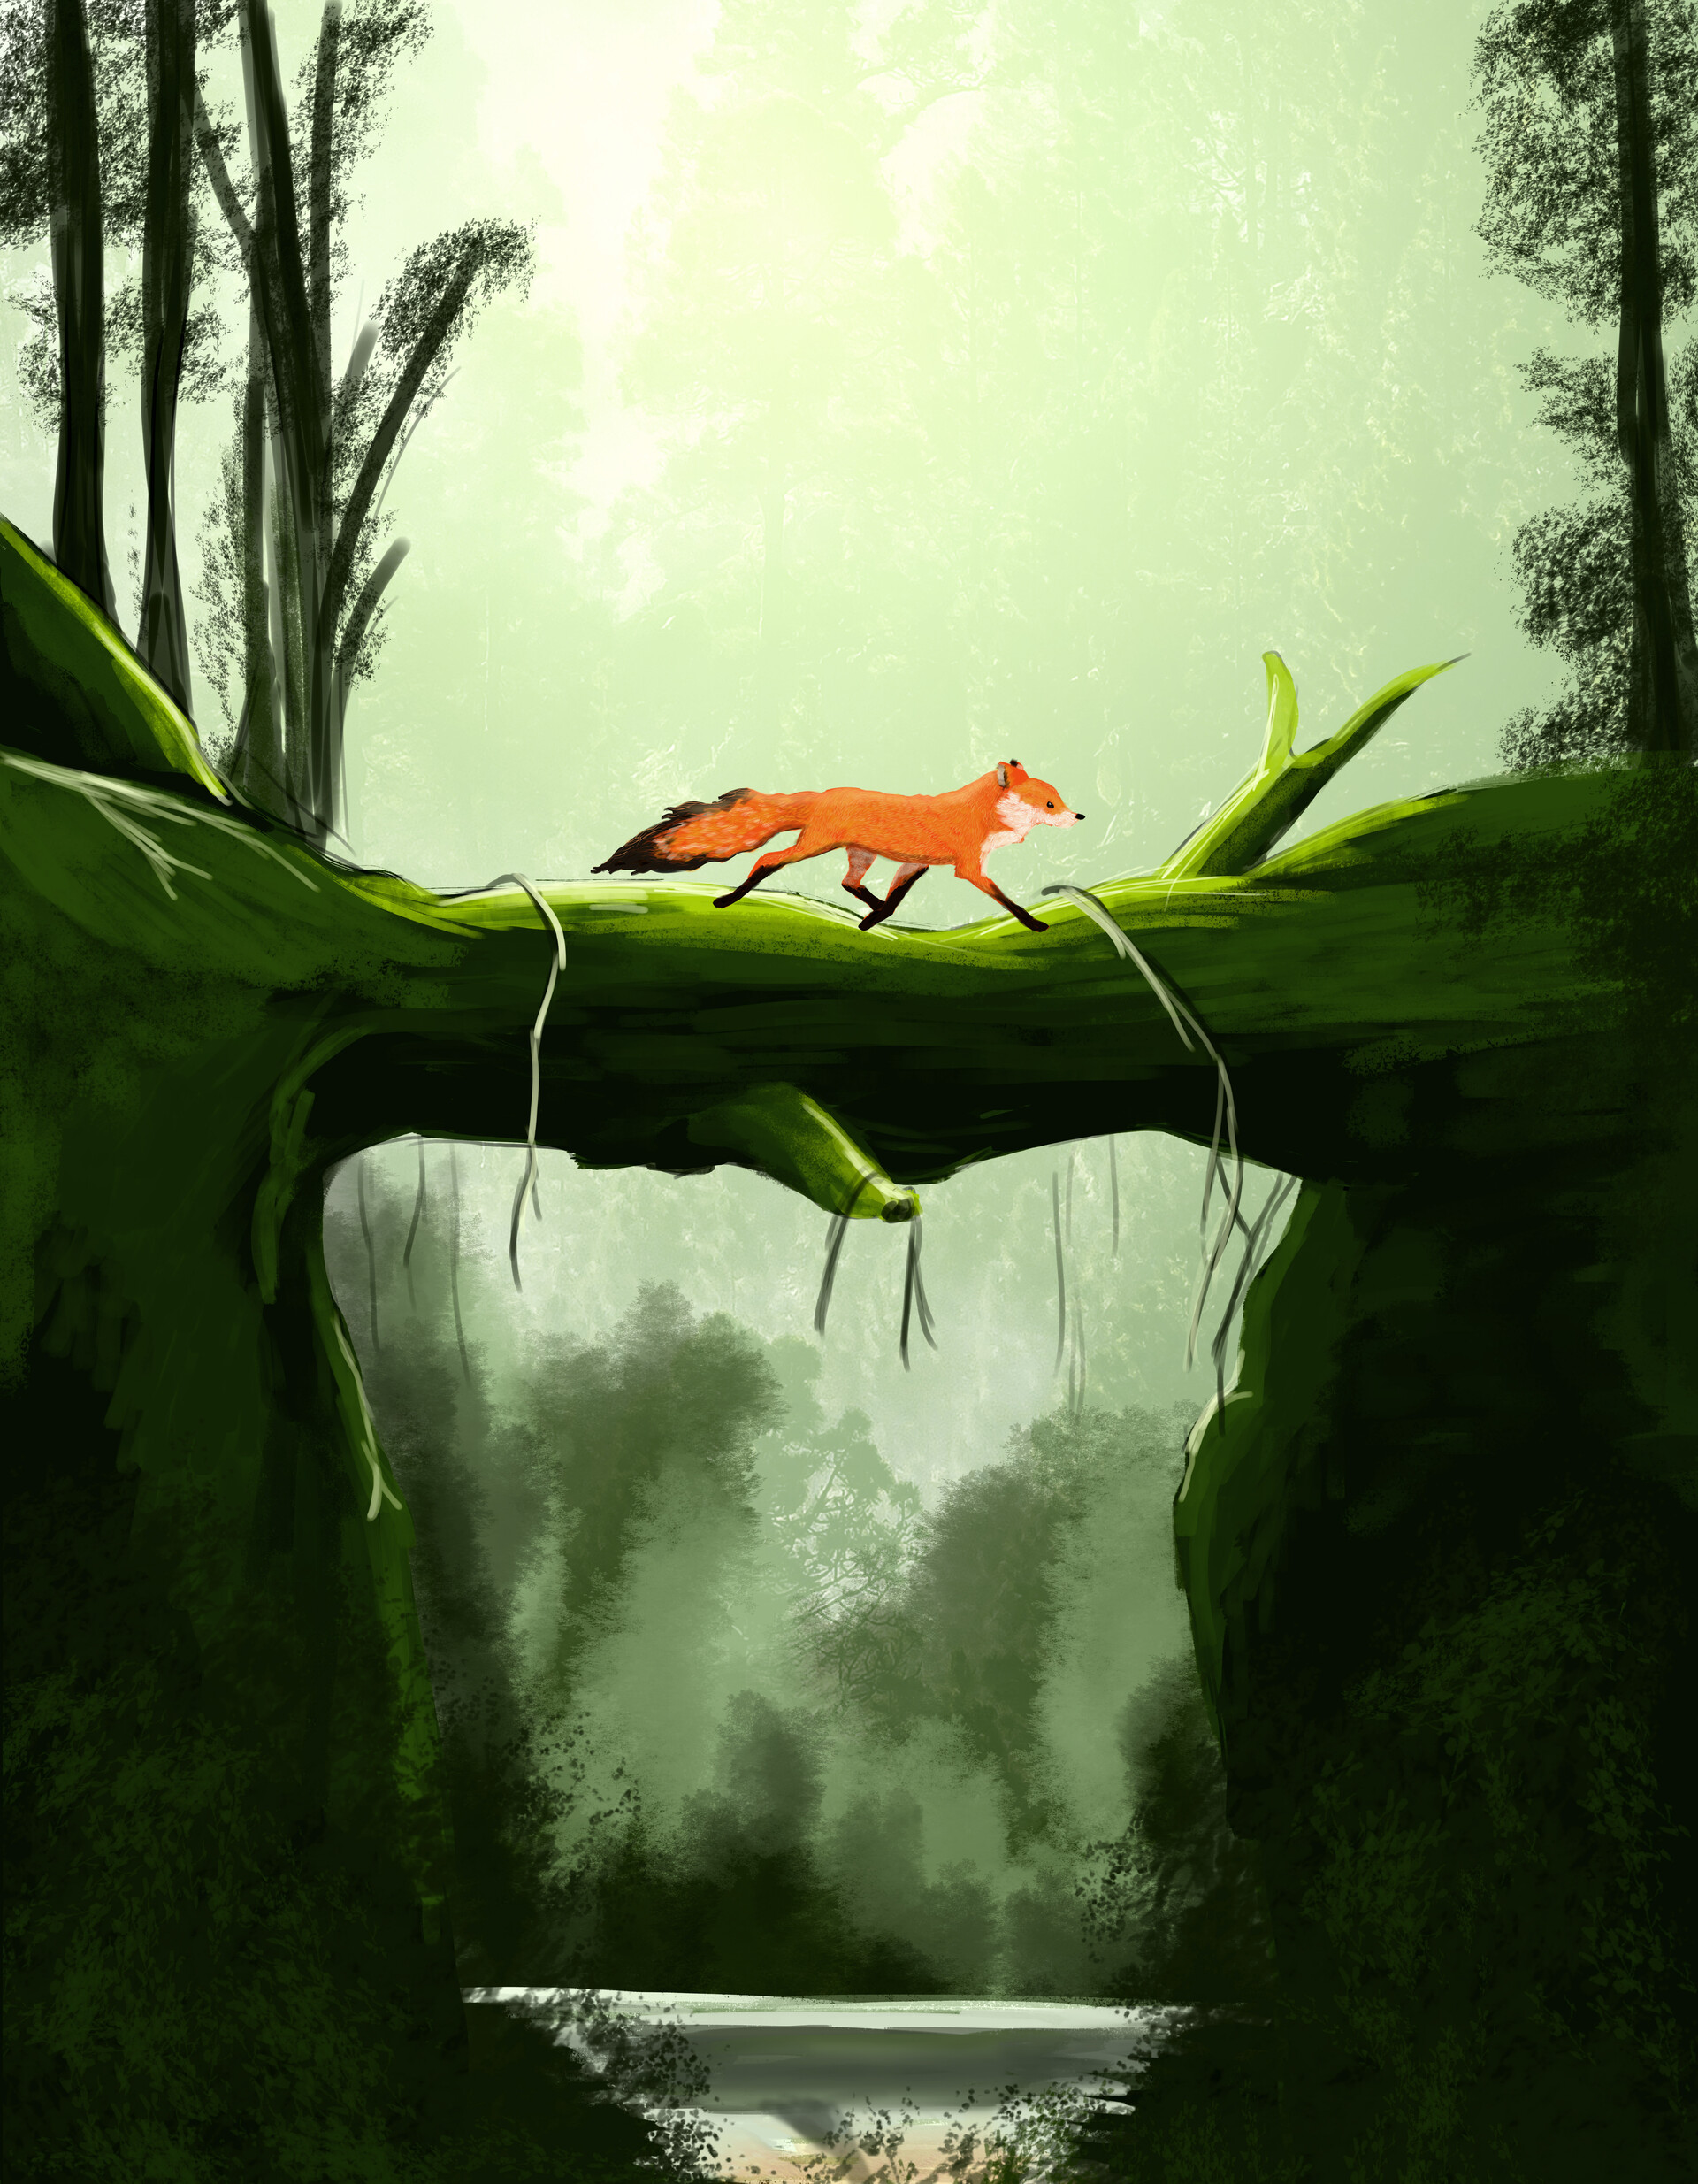 65768 download wallpaper fox, art, bridge, nice, sweetheart screensavers and pictures for free